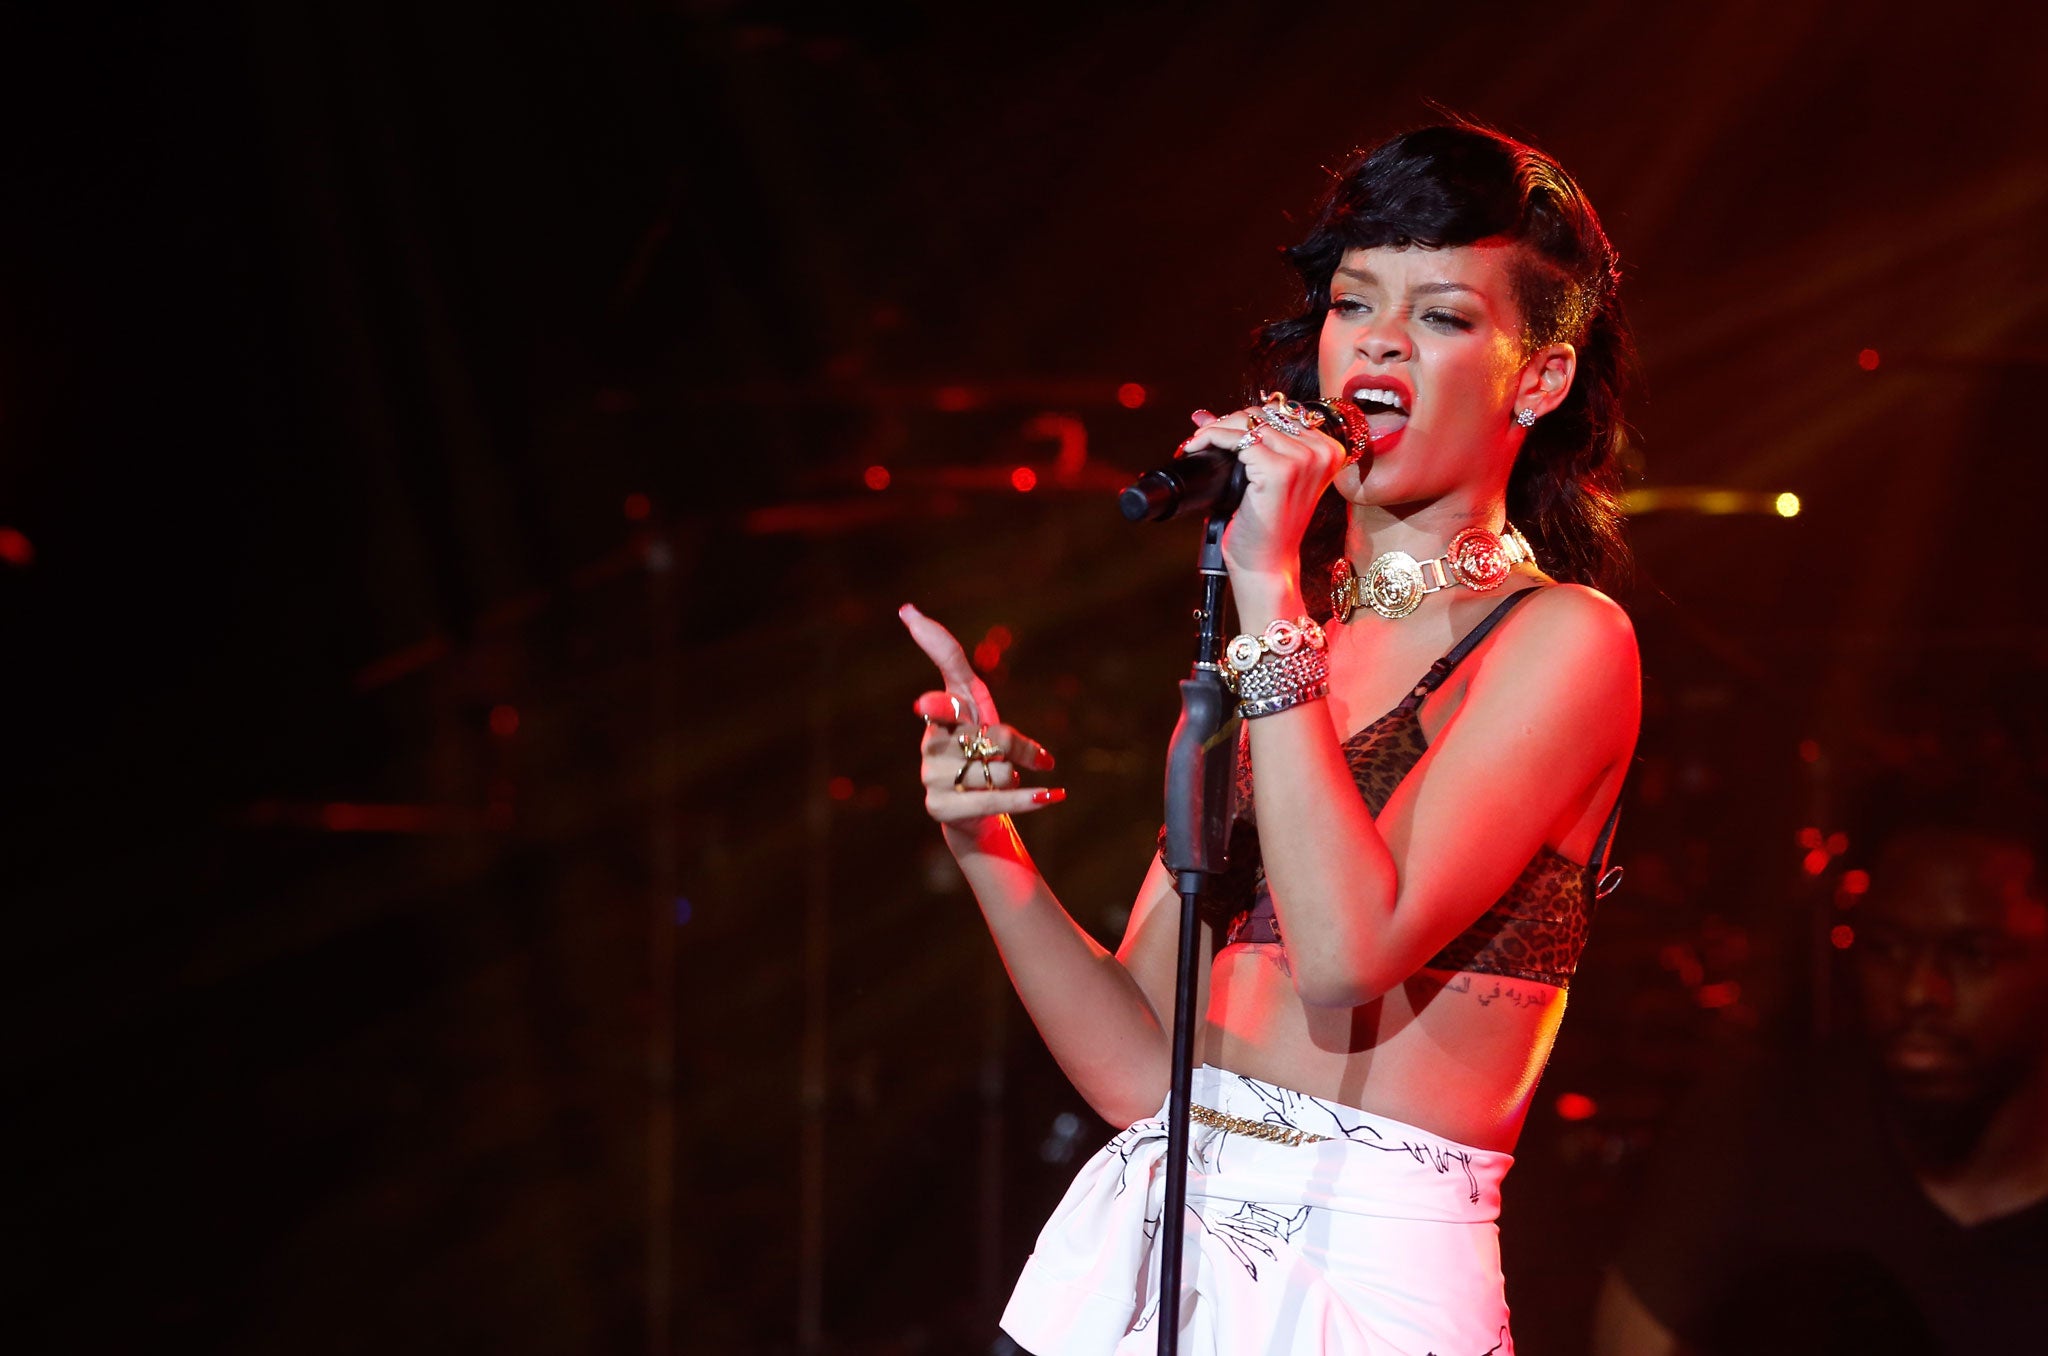 Singer Rihanna performs live on stage as part of her 777 tour at The Forum on November 19, 2012 in London, England.